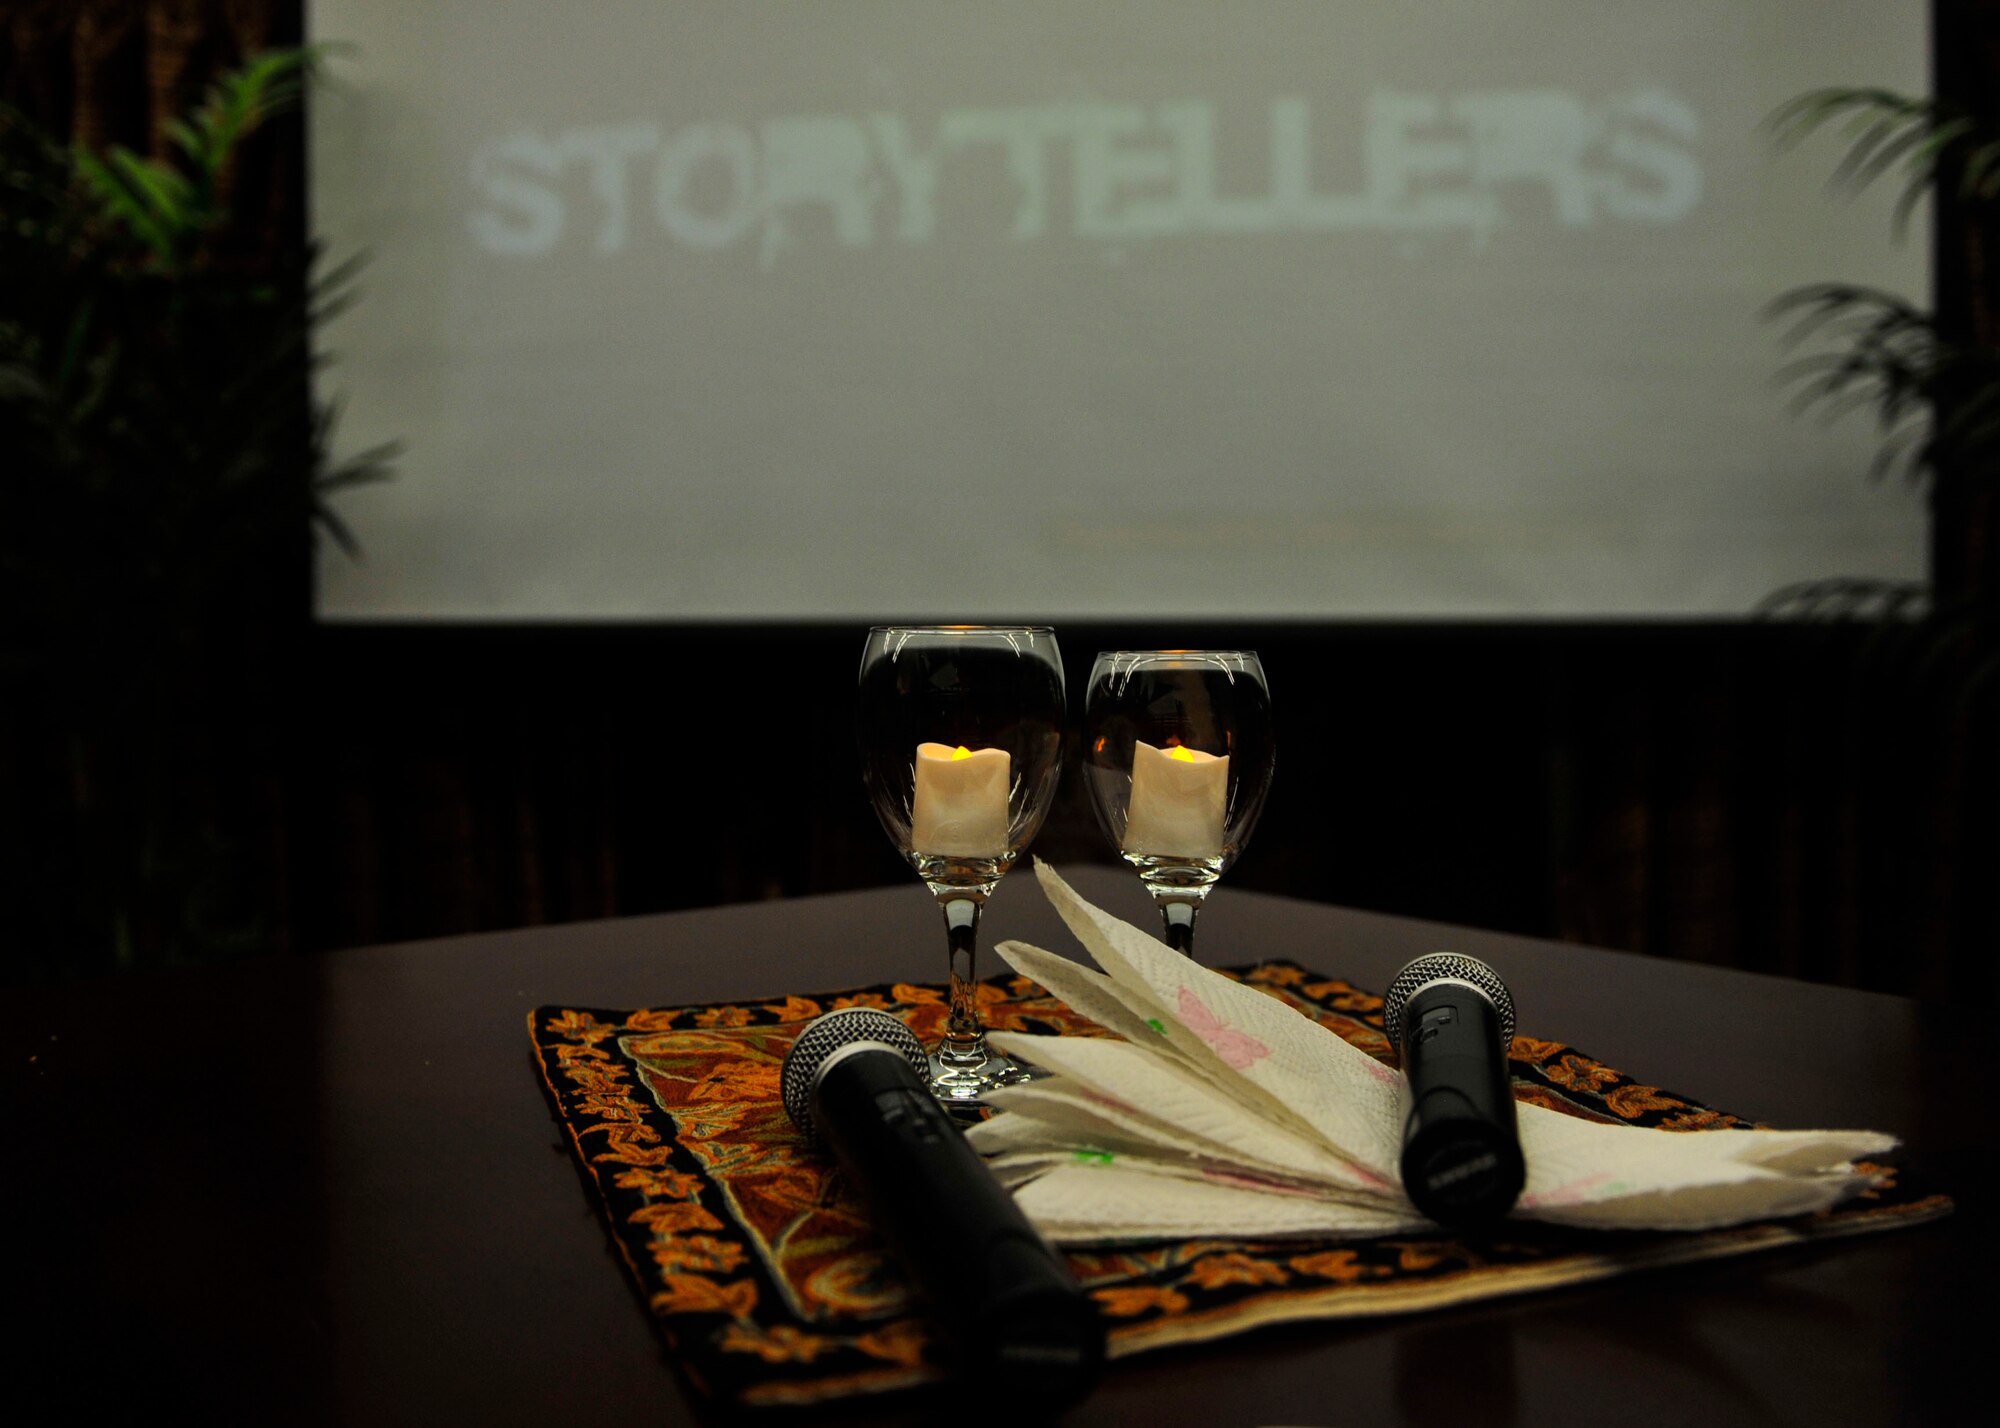 A Storytellers event was held at Al Udeid Air Force Base, Qatar, Oct. 4, 2014. The Storytellers resiliency forum is an Air Force program that began at Incirlik Air Base, Turkey in 2012 to create community connections and open dialogue among Airmen. (U.S. Air Force photo by Senior Airman Colin Cates)  